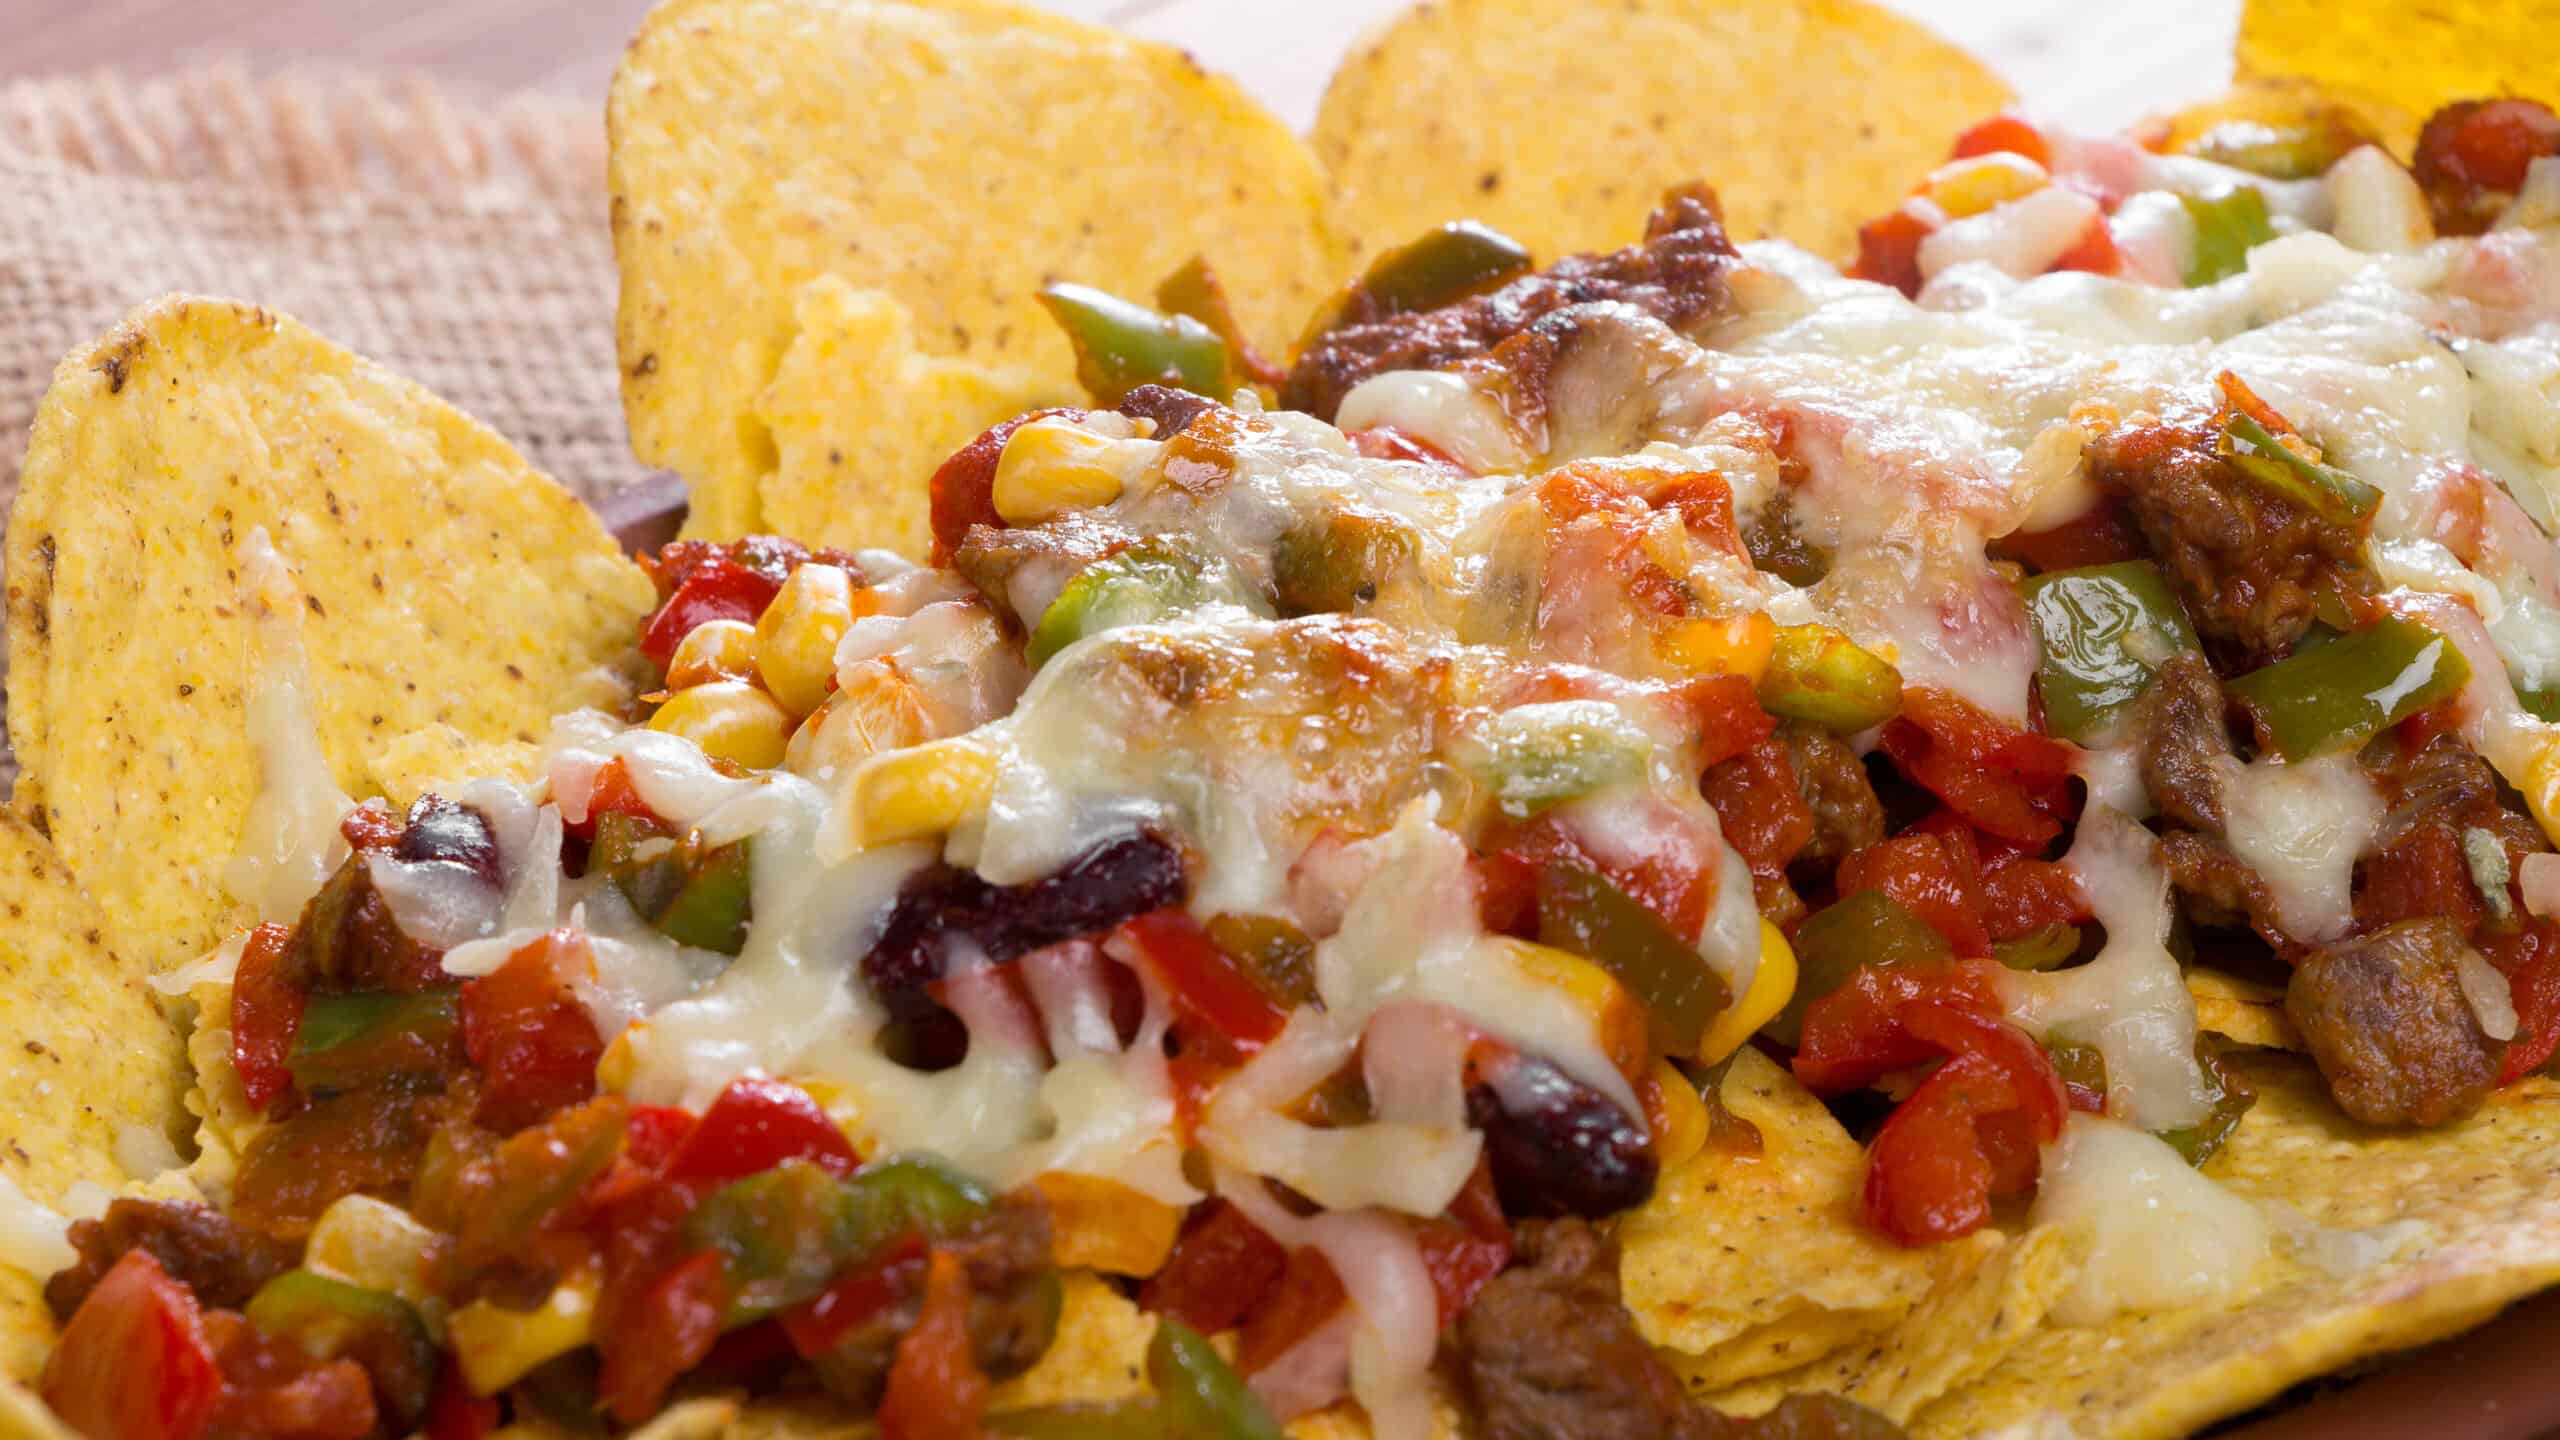 Mexican Nachos baked in a casserole with cheese, beans, corn, hot jalapeno, chicken, red pepper, and mushrooms served on a wooden table.